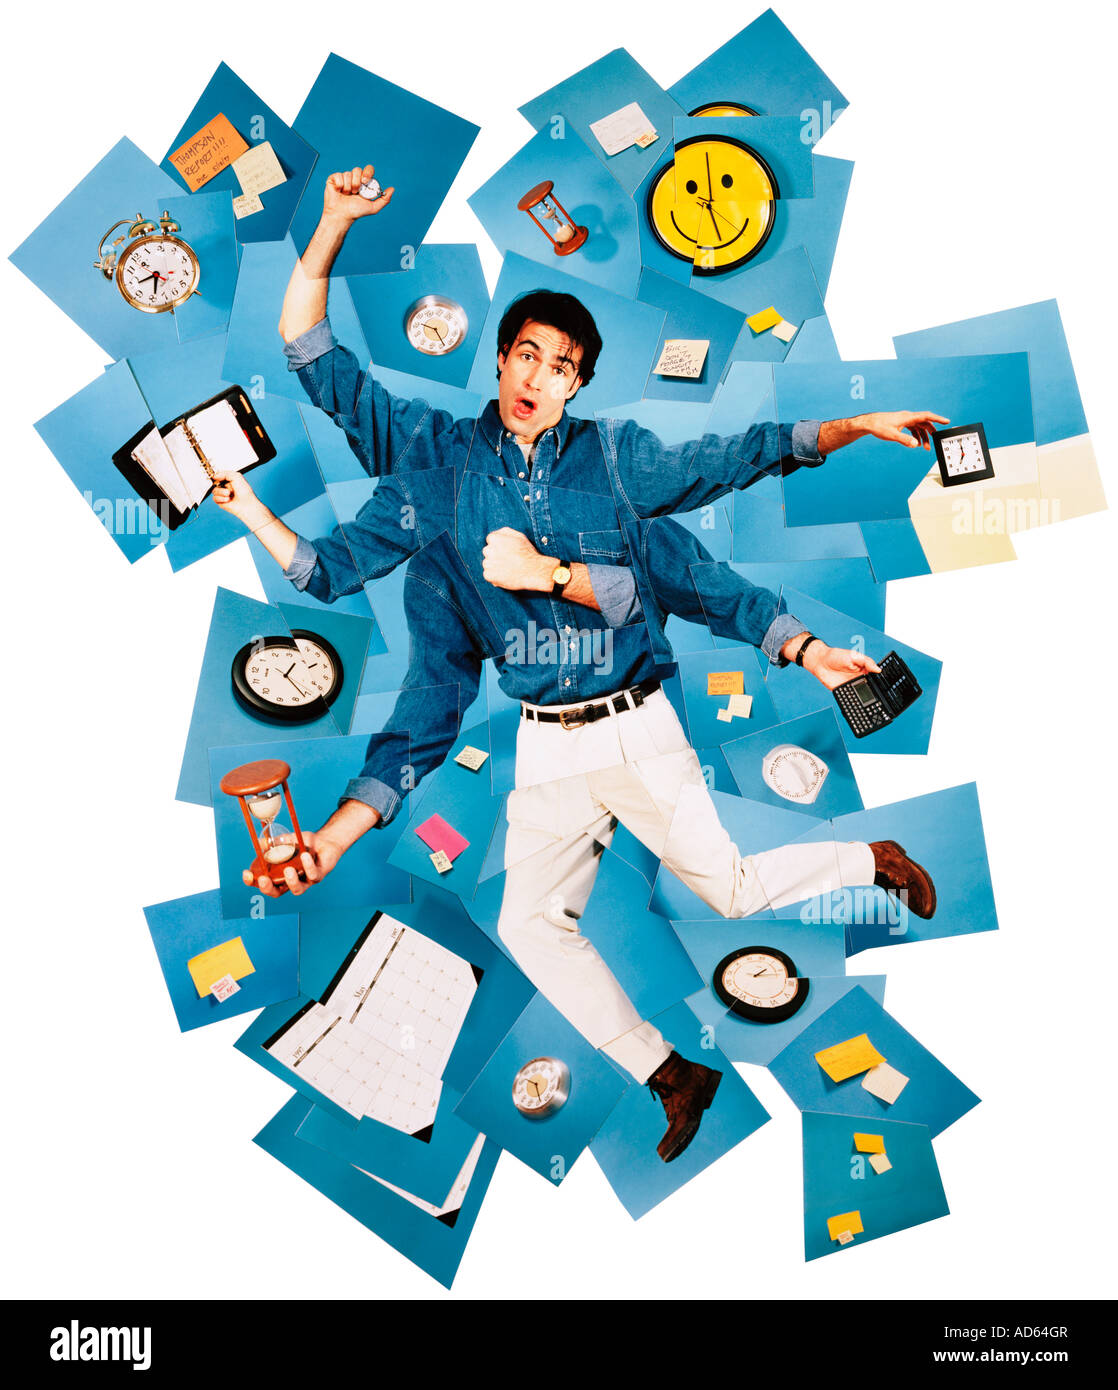 Collage of harried man surrounded by clocks Stock Photo